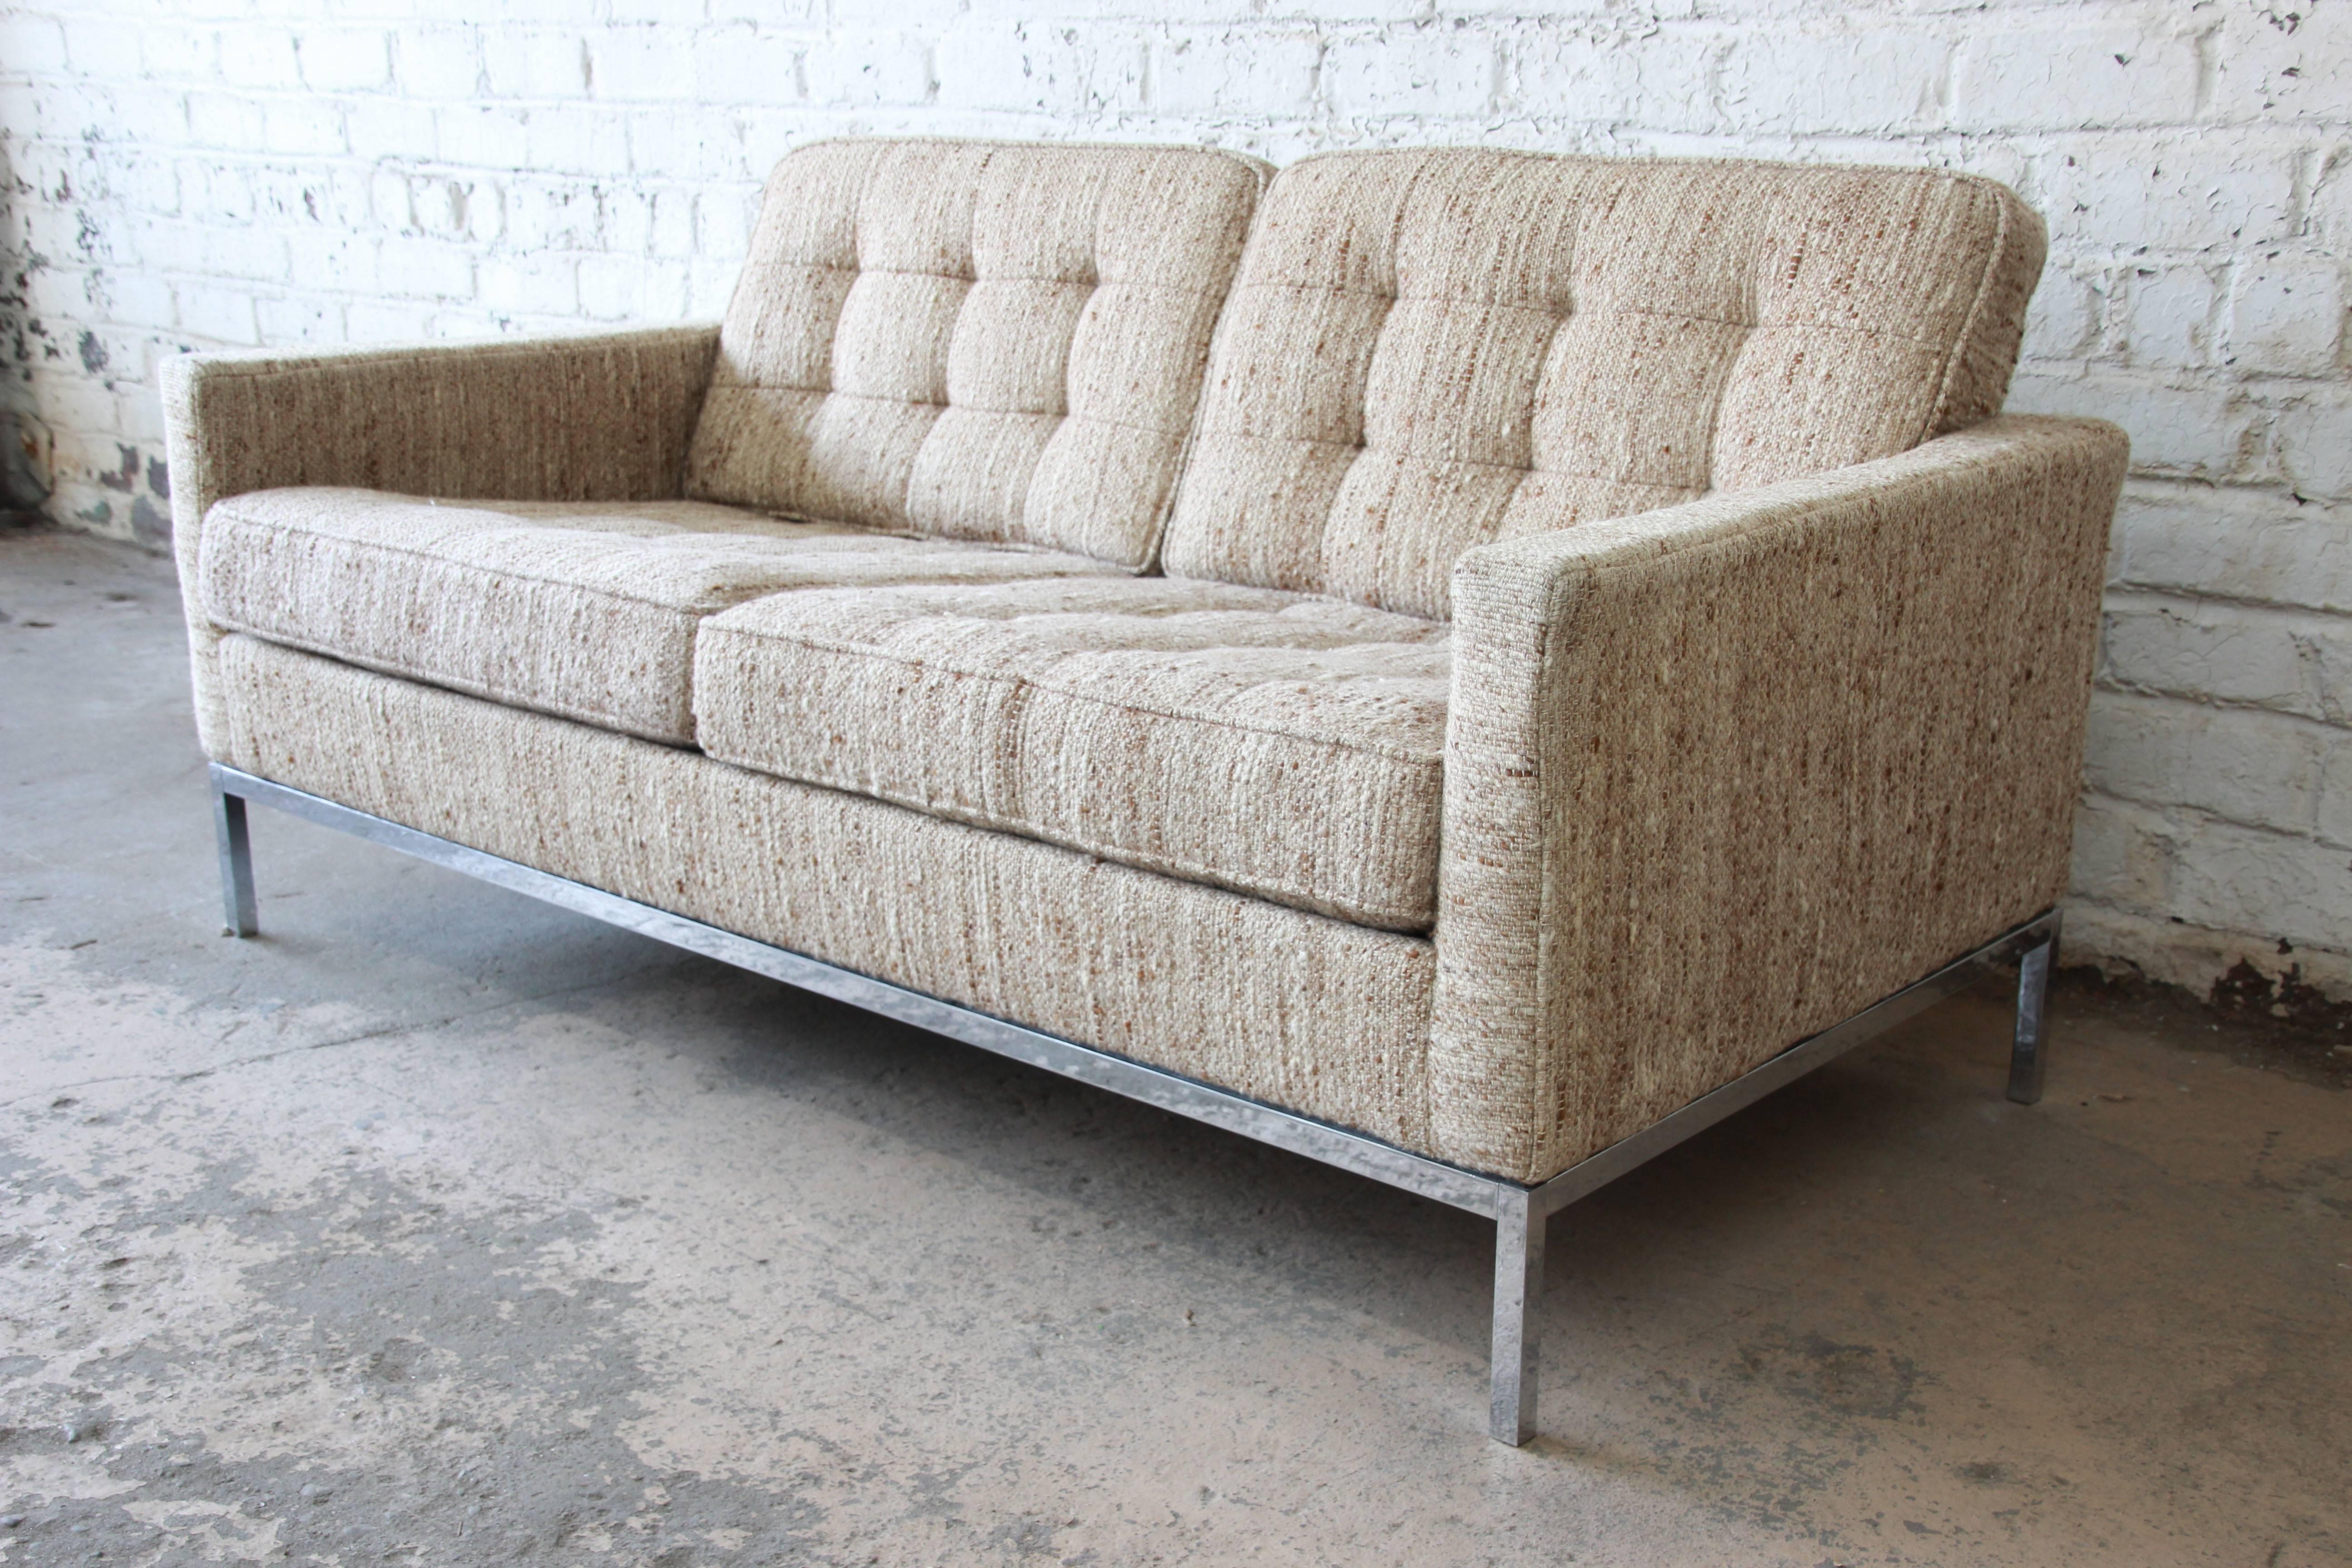 A stunning Mid-Century Modern loveseat sofa designed by Florence Knoll for Knoll International. The loveseat features a polished chrome base and the original multicolored wool upholstery in oatmeal, brown, and ivory. Stylish and comfortable, this is